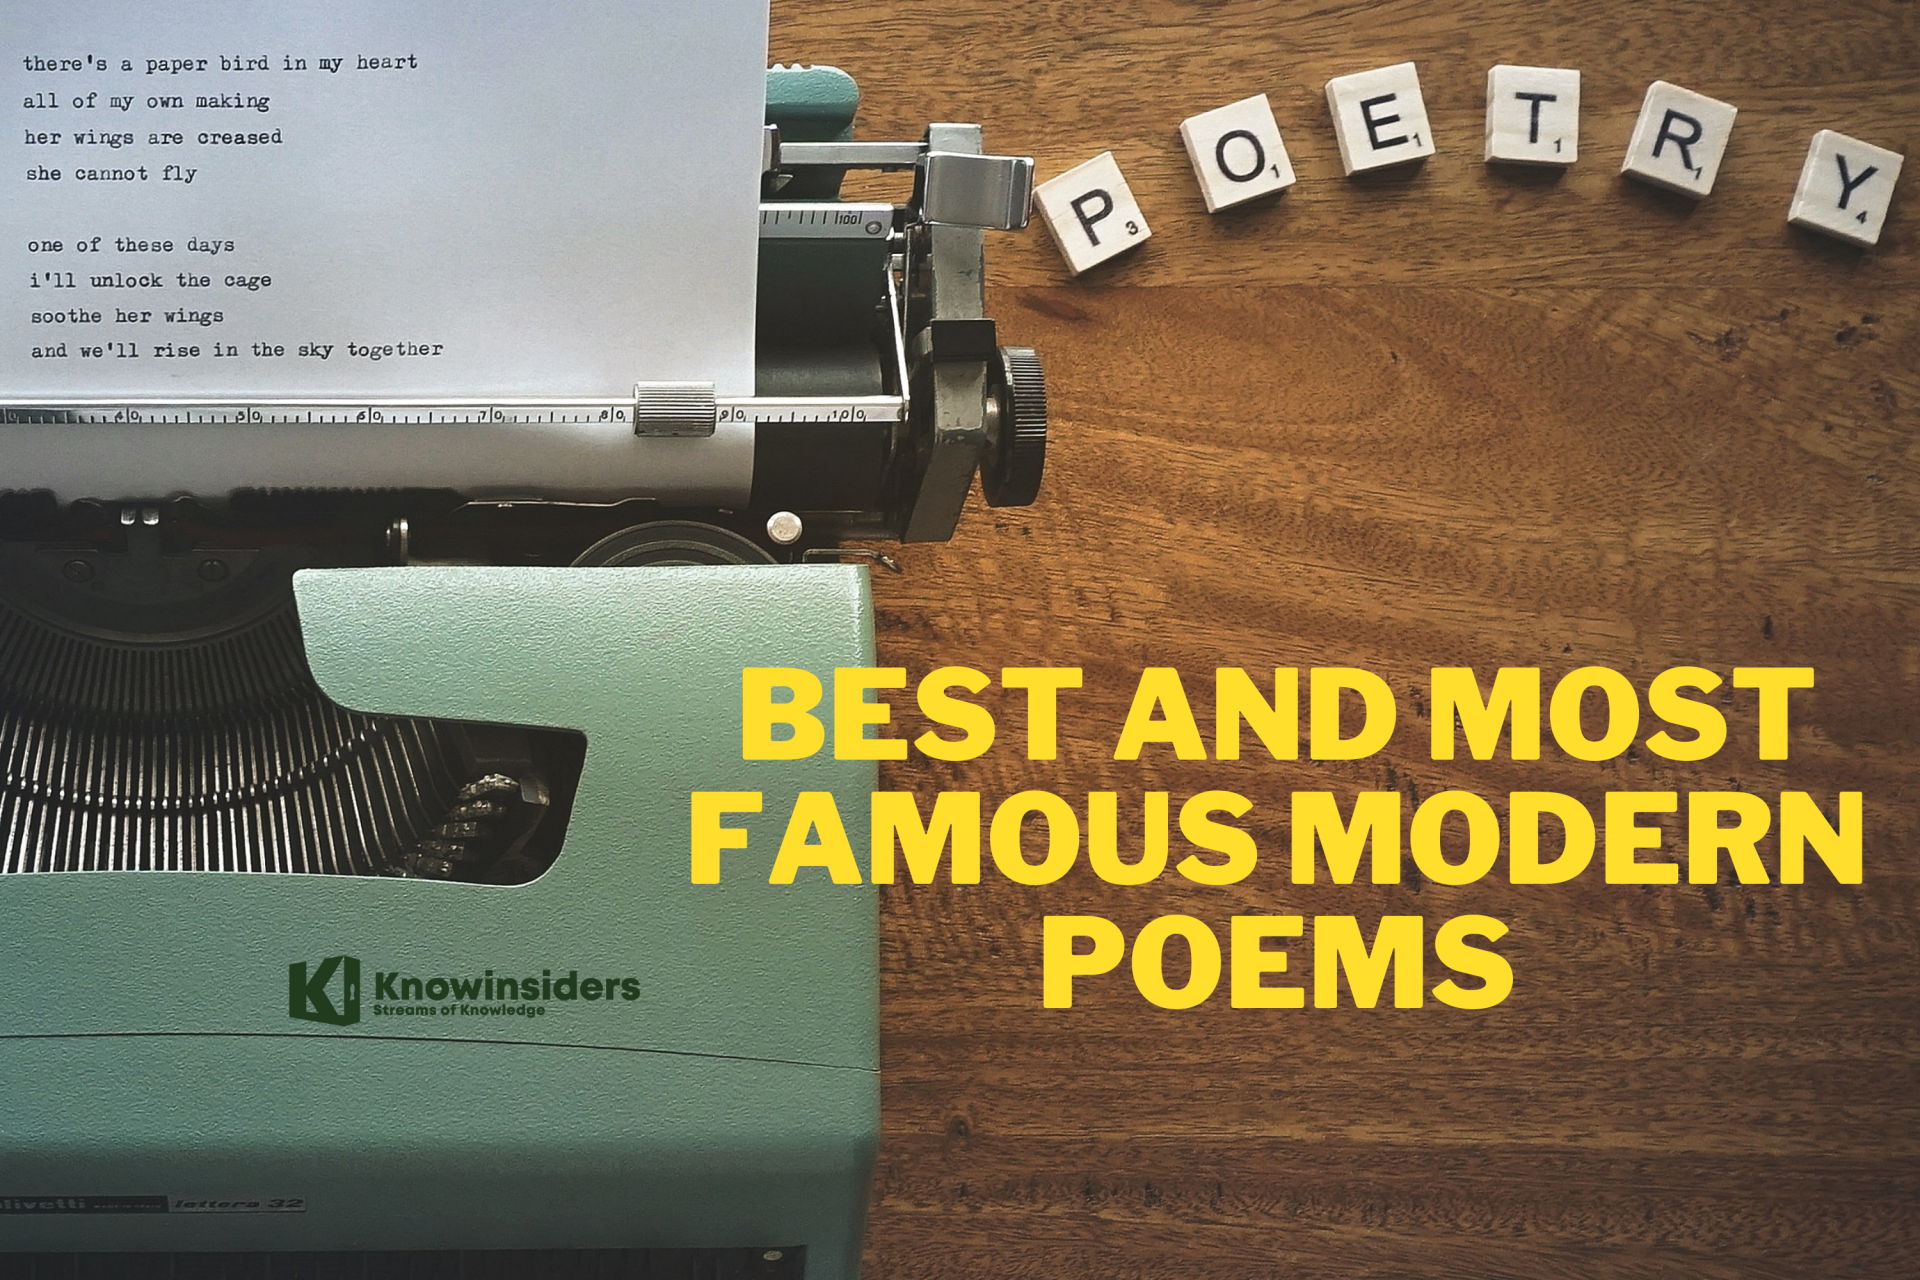 Top 10 Best And Most Famous Modern Poems